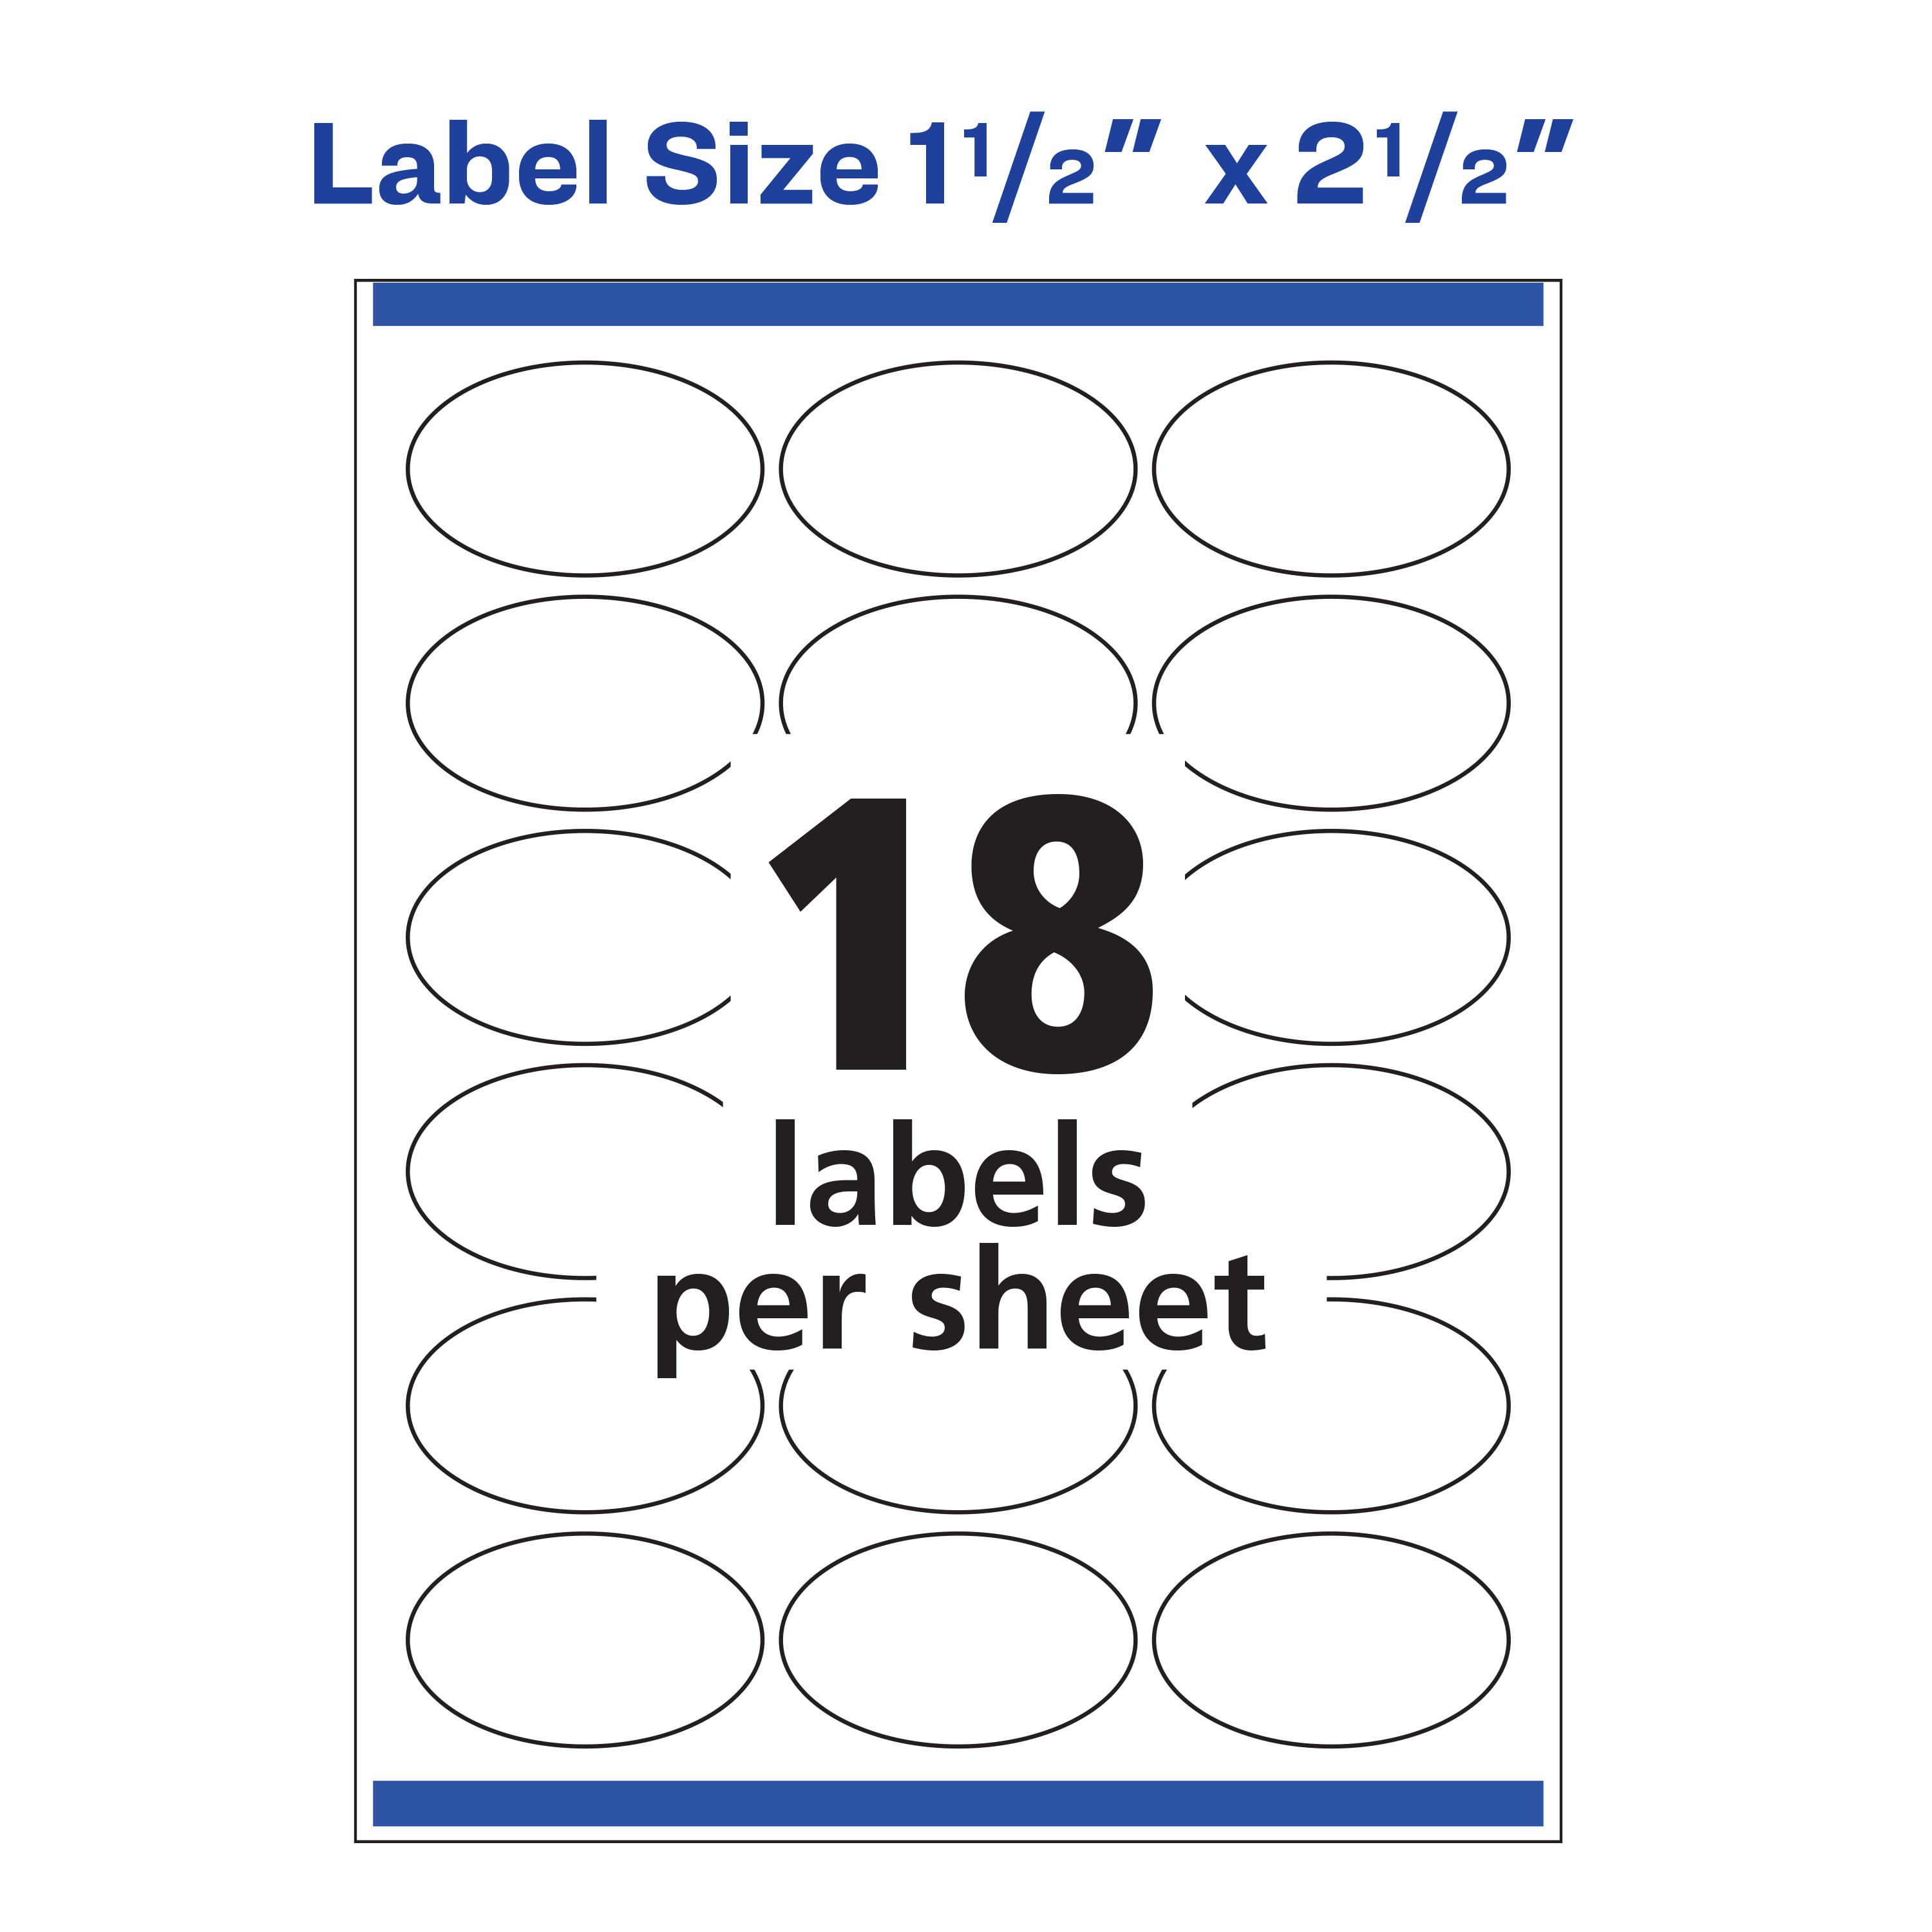 31 Avery Oval Label Template 22804 Labels 2021